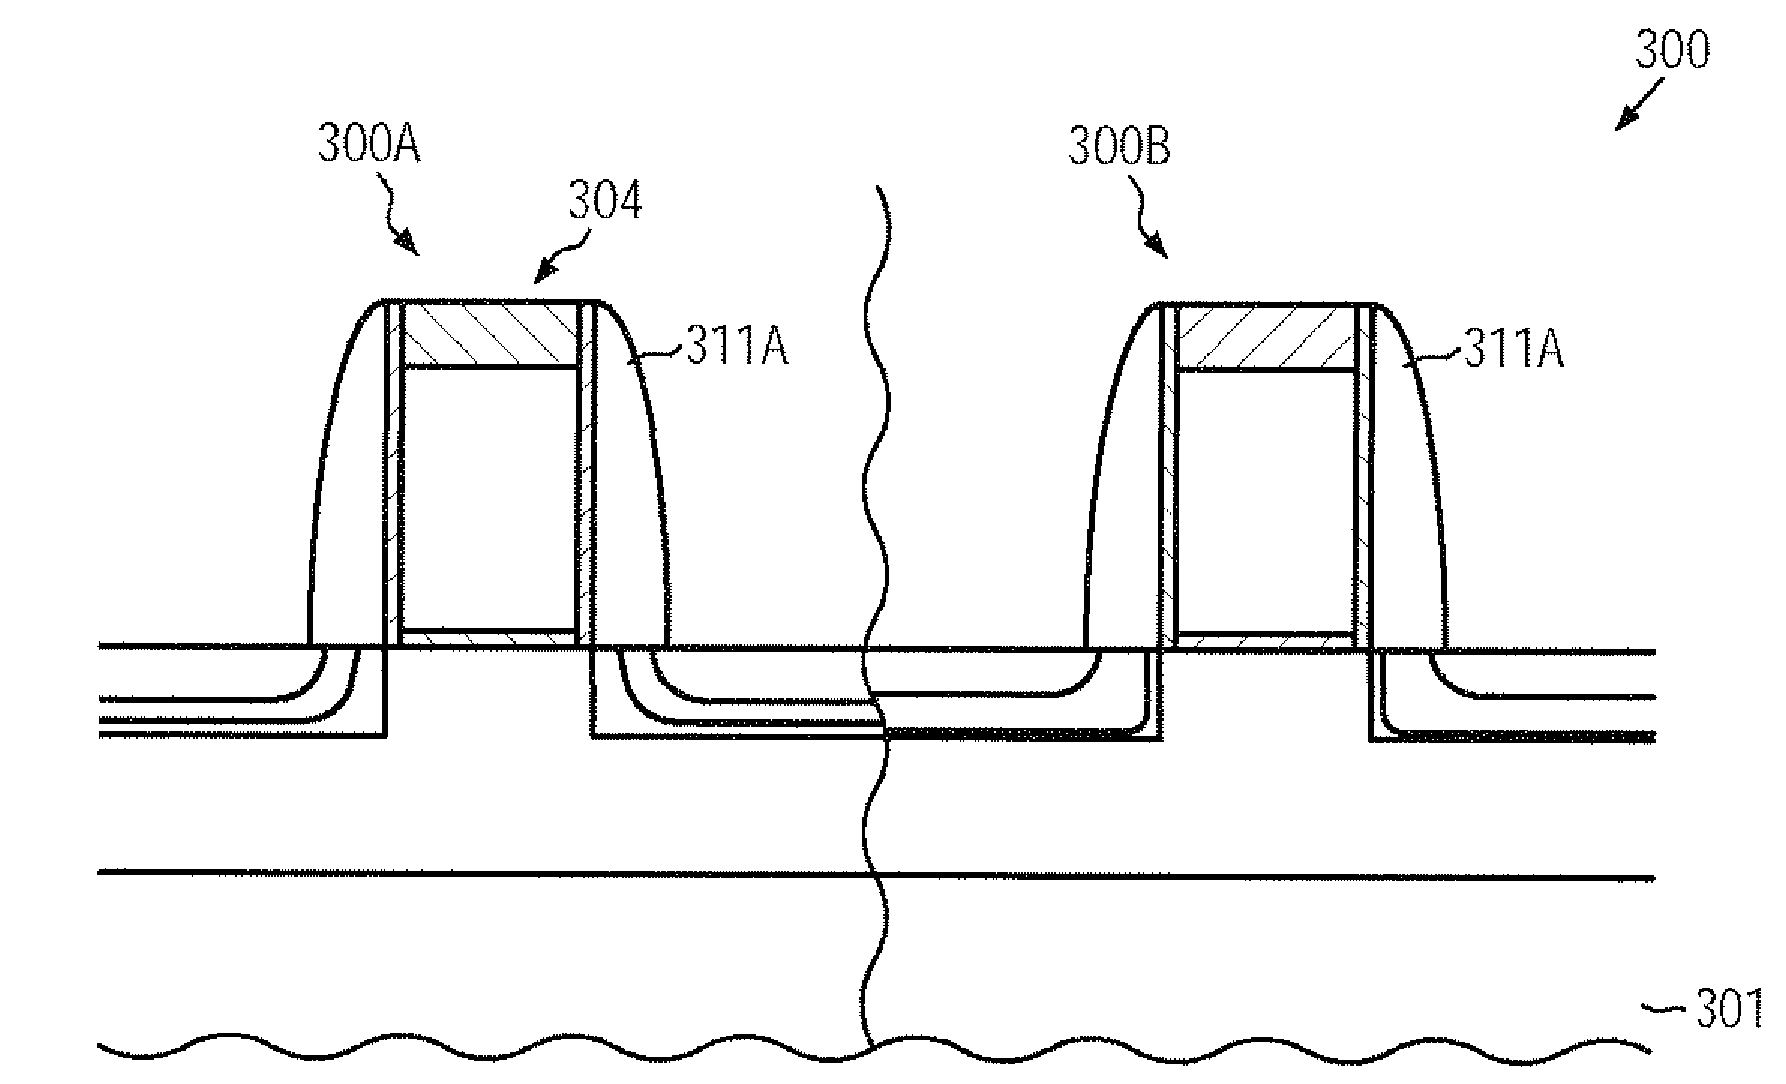 In situ formed drain and source regions in a silicon/germanium containing transistor device